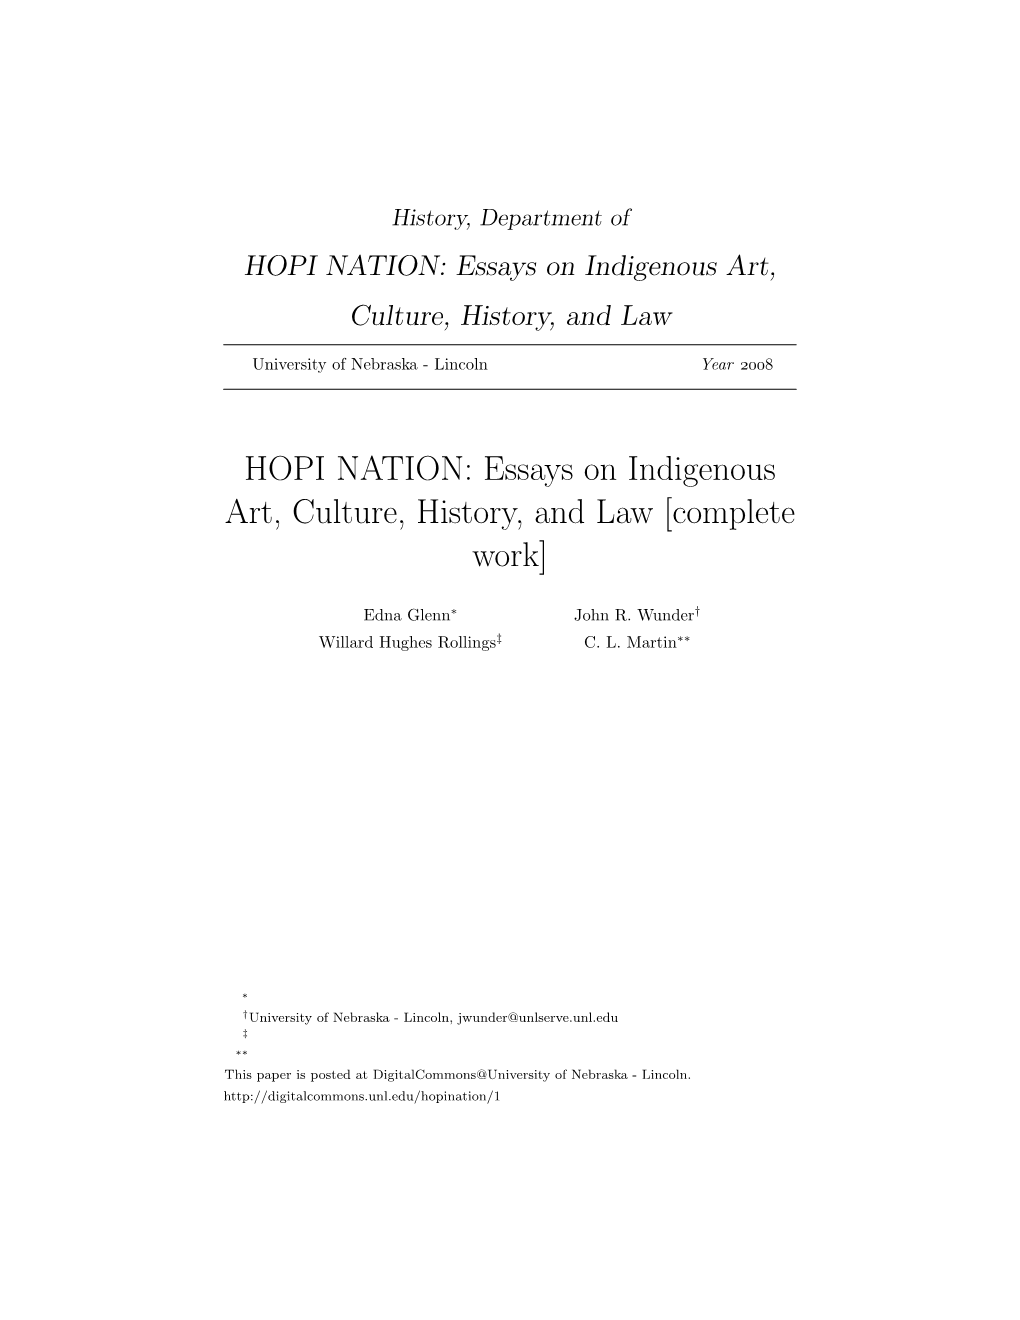 HOPI NATION: Essays on Indigenous Art, Culture, History, and Law